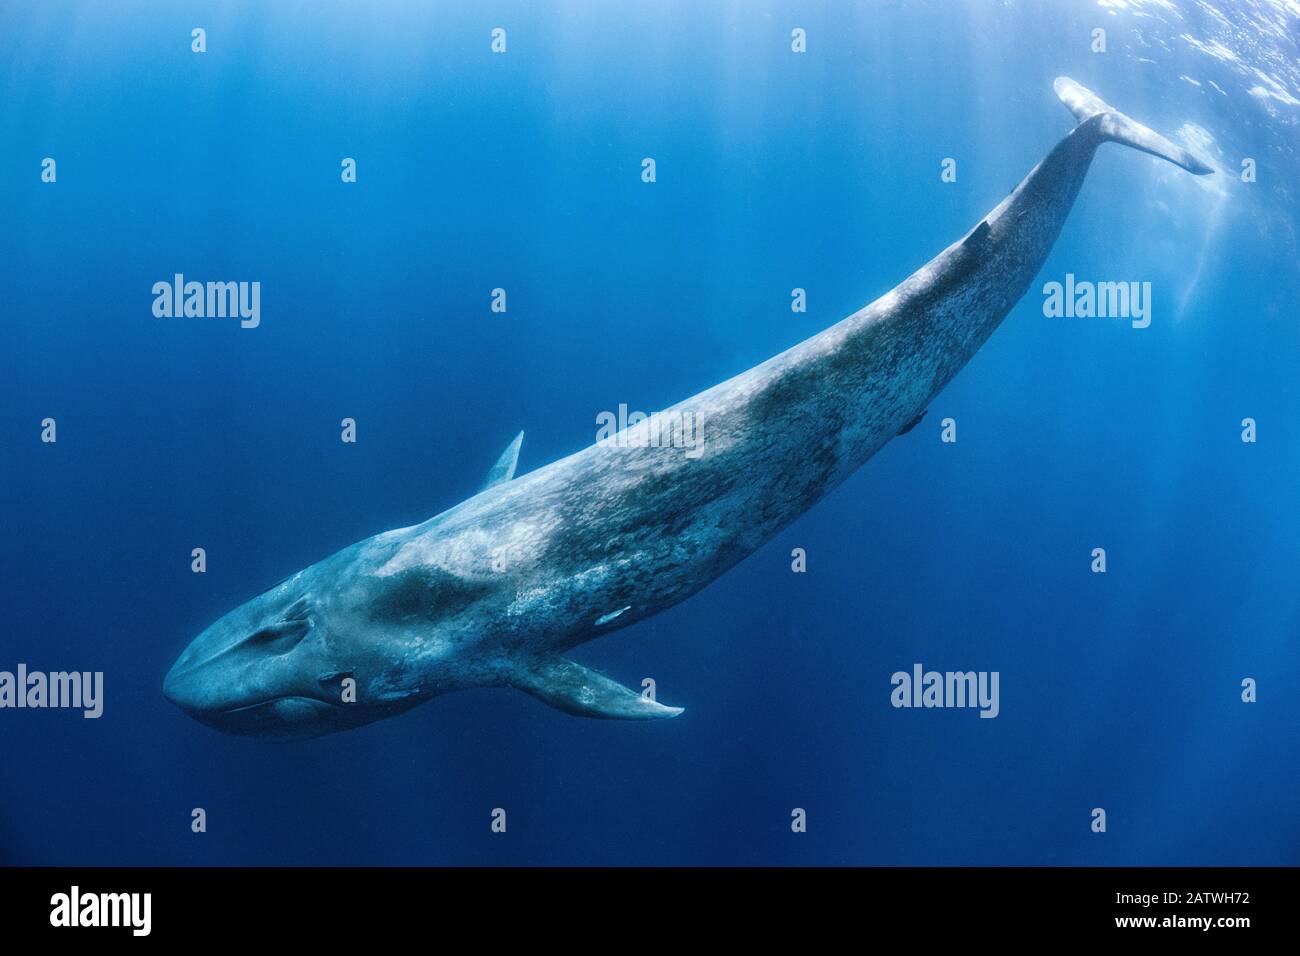 Blue whale (Balaenoptera musculus) swims beneath the surface of the ocean. Indian Ocean, off Sri Lanka. Stock Photo